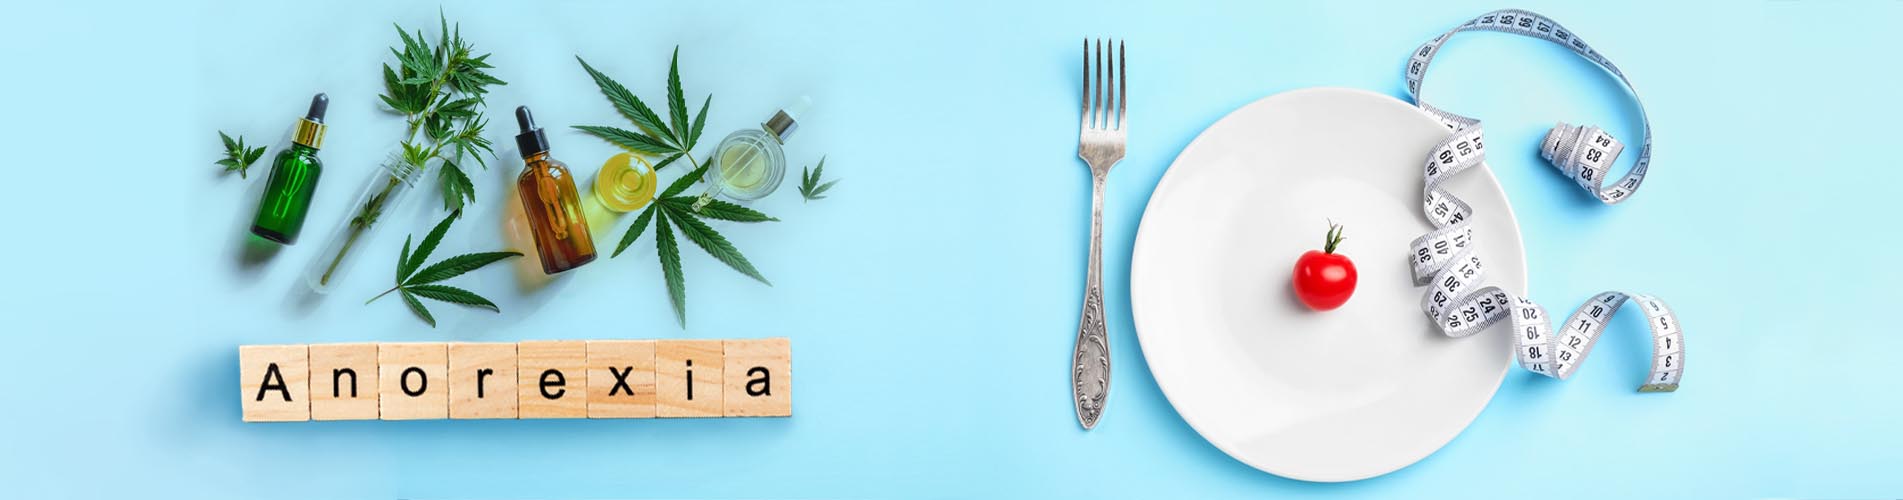 Cannabis for anorexia